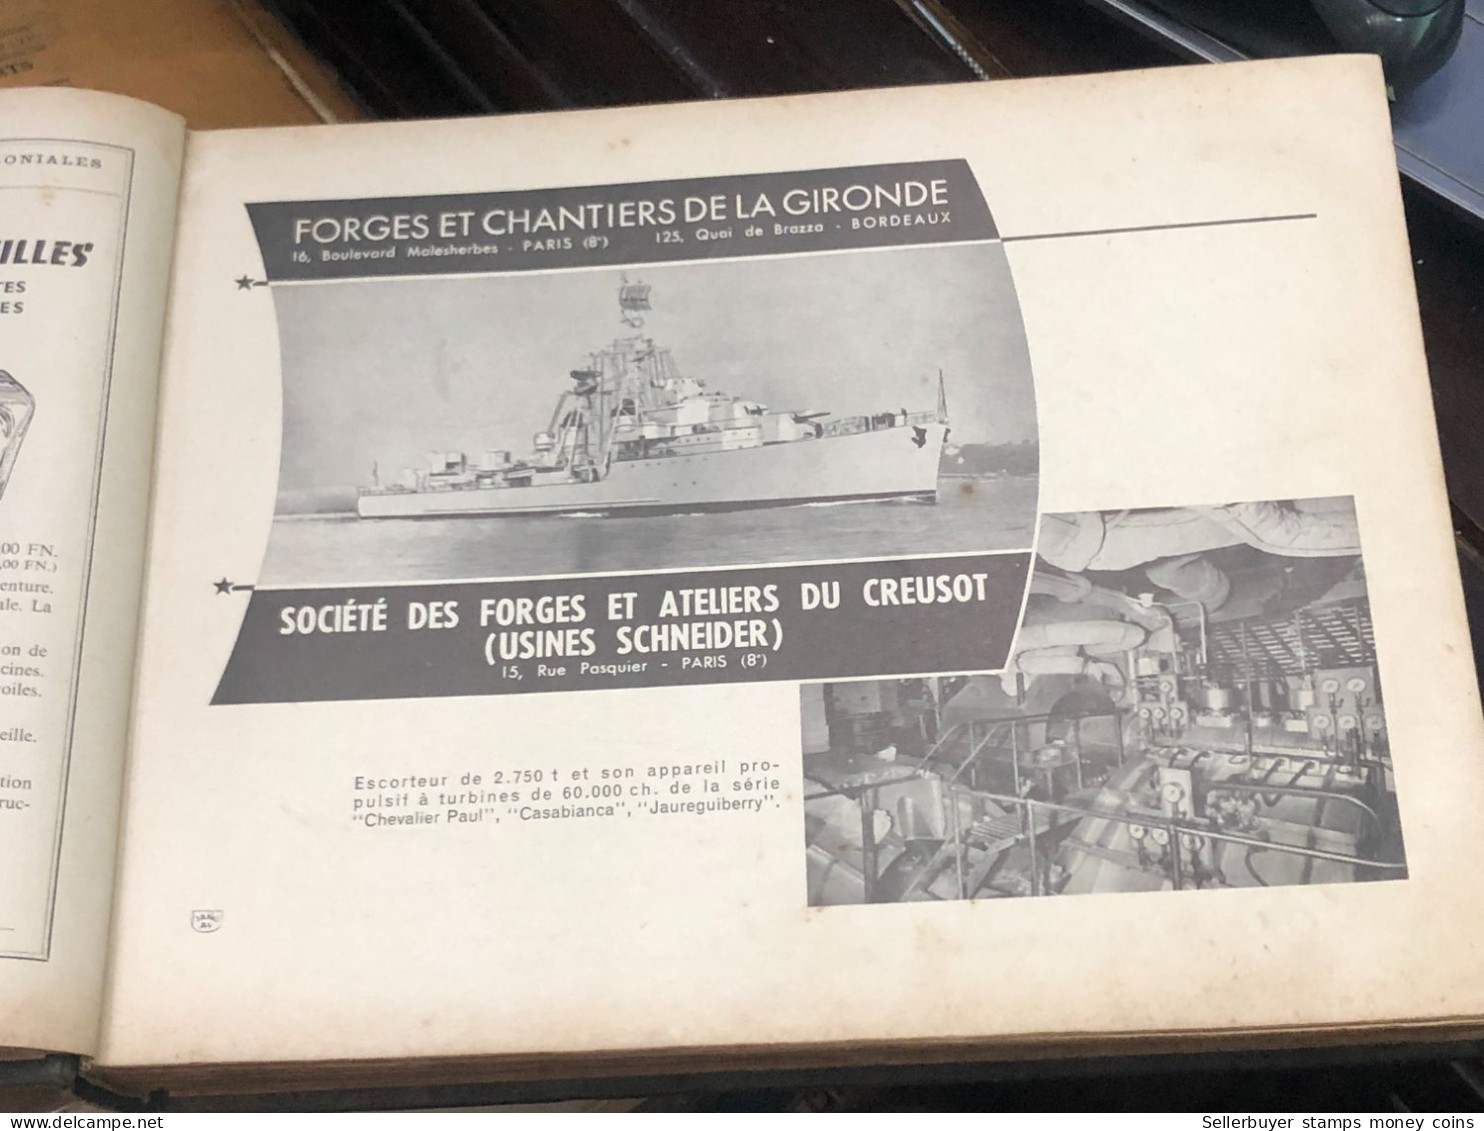 French books printed with images of warships, engines and submarines from 1897 and 1960 were bought by Vietnamese reader